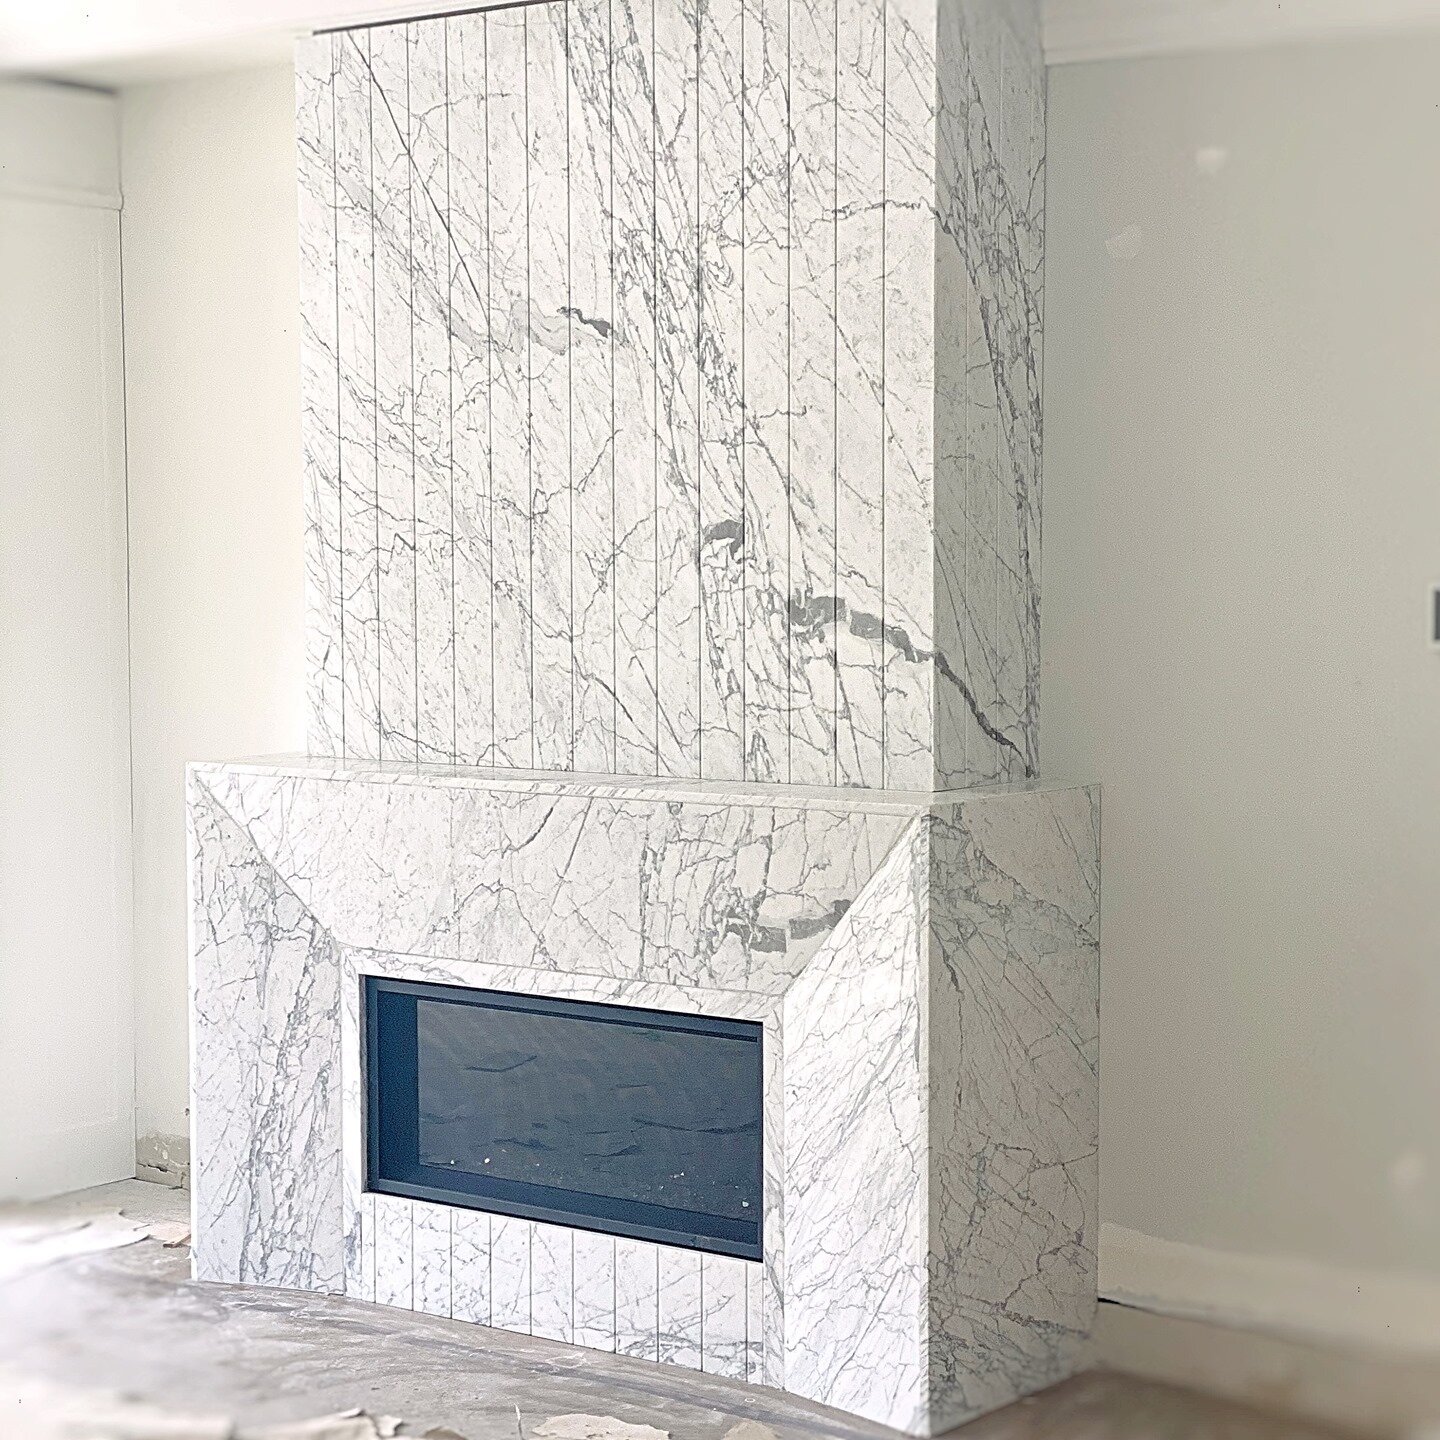 Calacutta Belgia from @Ciot.toronto compliments the beautiful fluted effect on the Fireplace surround designed by the talented @bananarch and installed by @elegancemarble 
#elegancemarble #calacuttabelgia #interiordesign #fireplacesurround #newhomes 